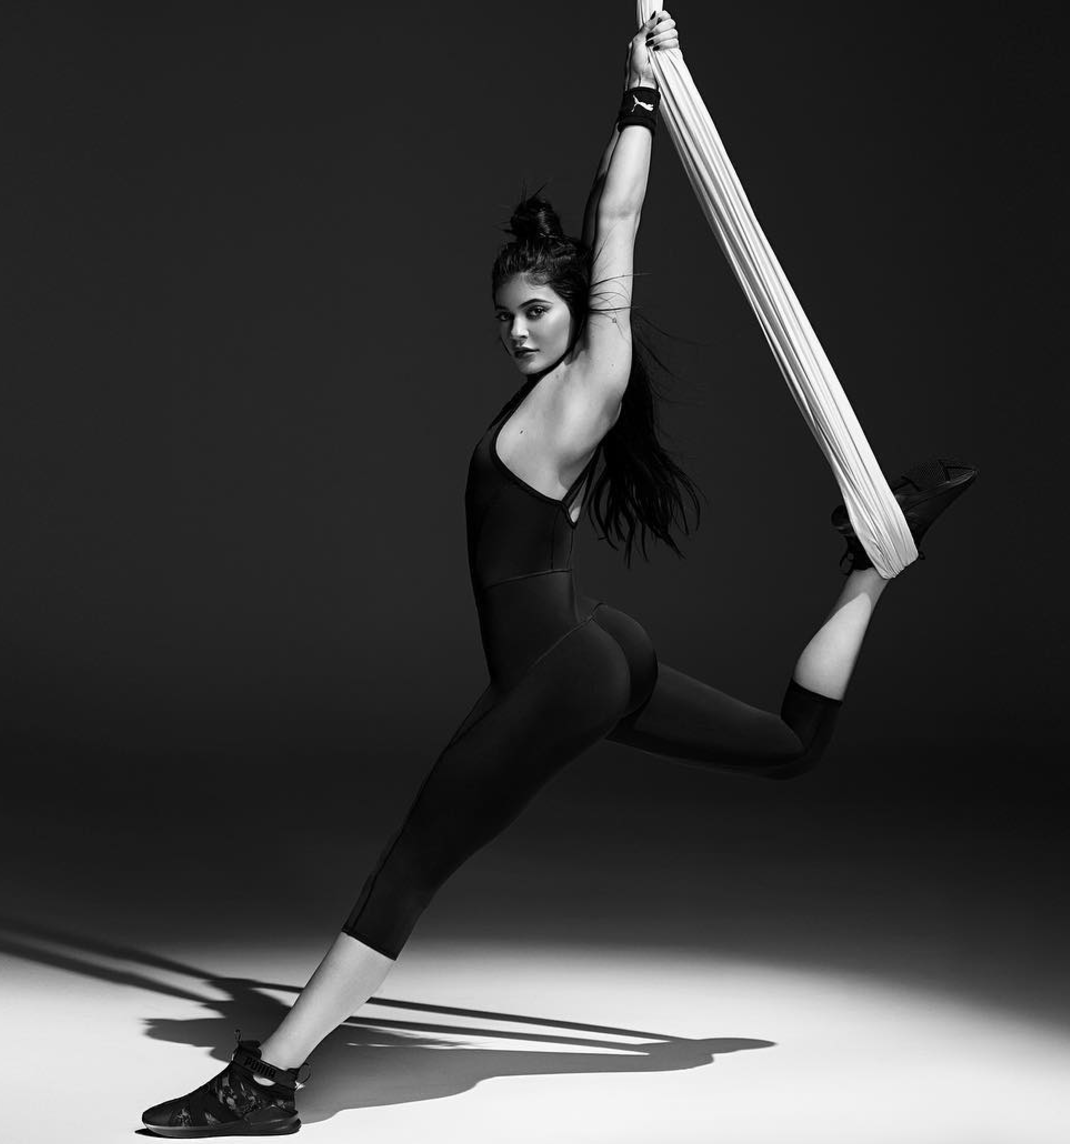 Puma’s ballet-themed collection starring Kylie Jenner takes athleisure to Swan Lake levels